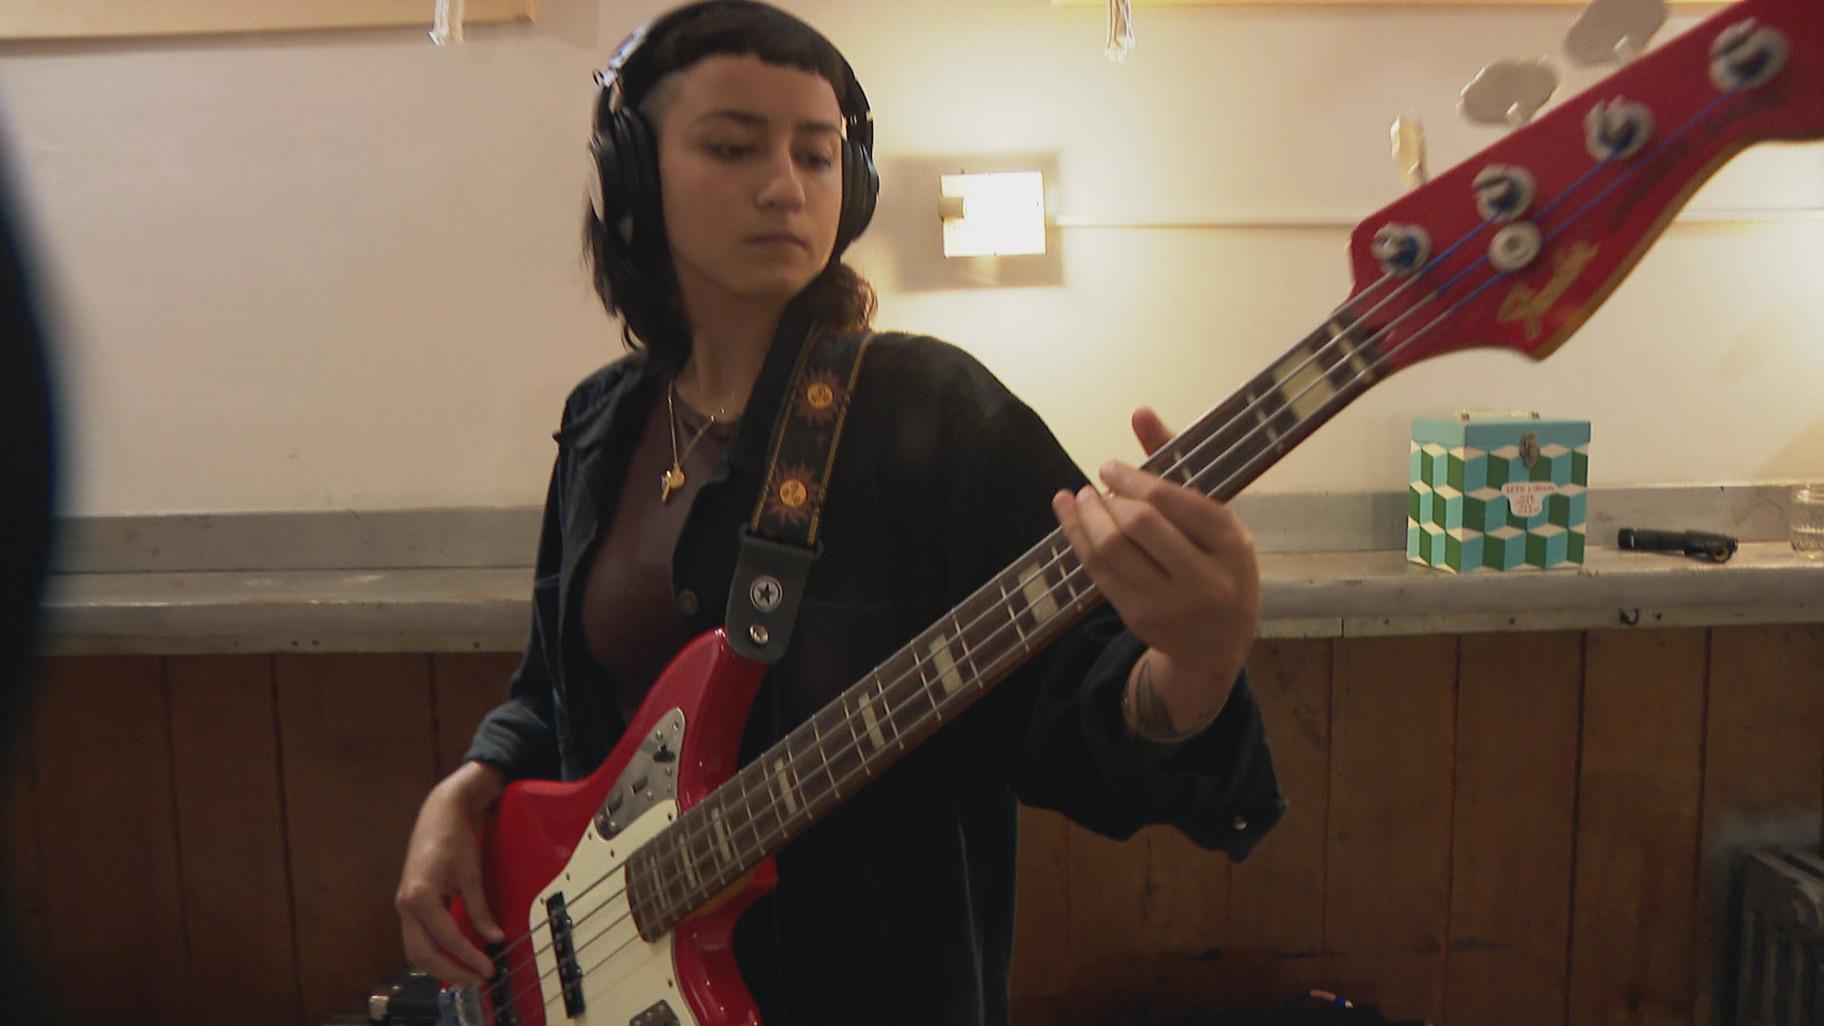 Late Nite Laundry’s bassist, Emily Burlew. (WTTW News)